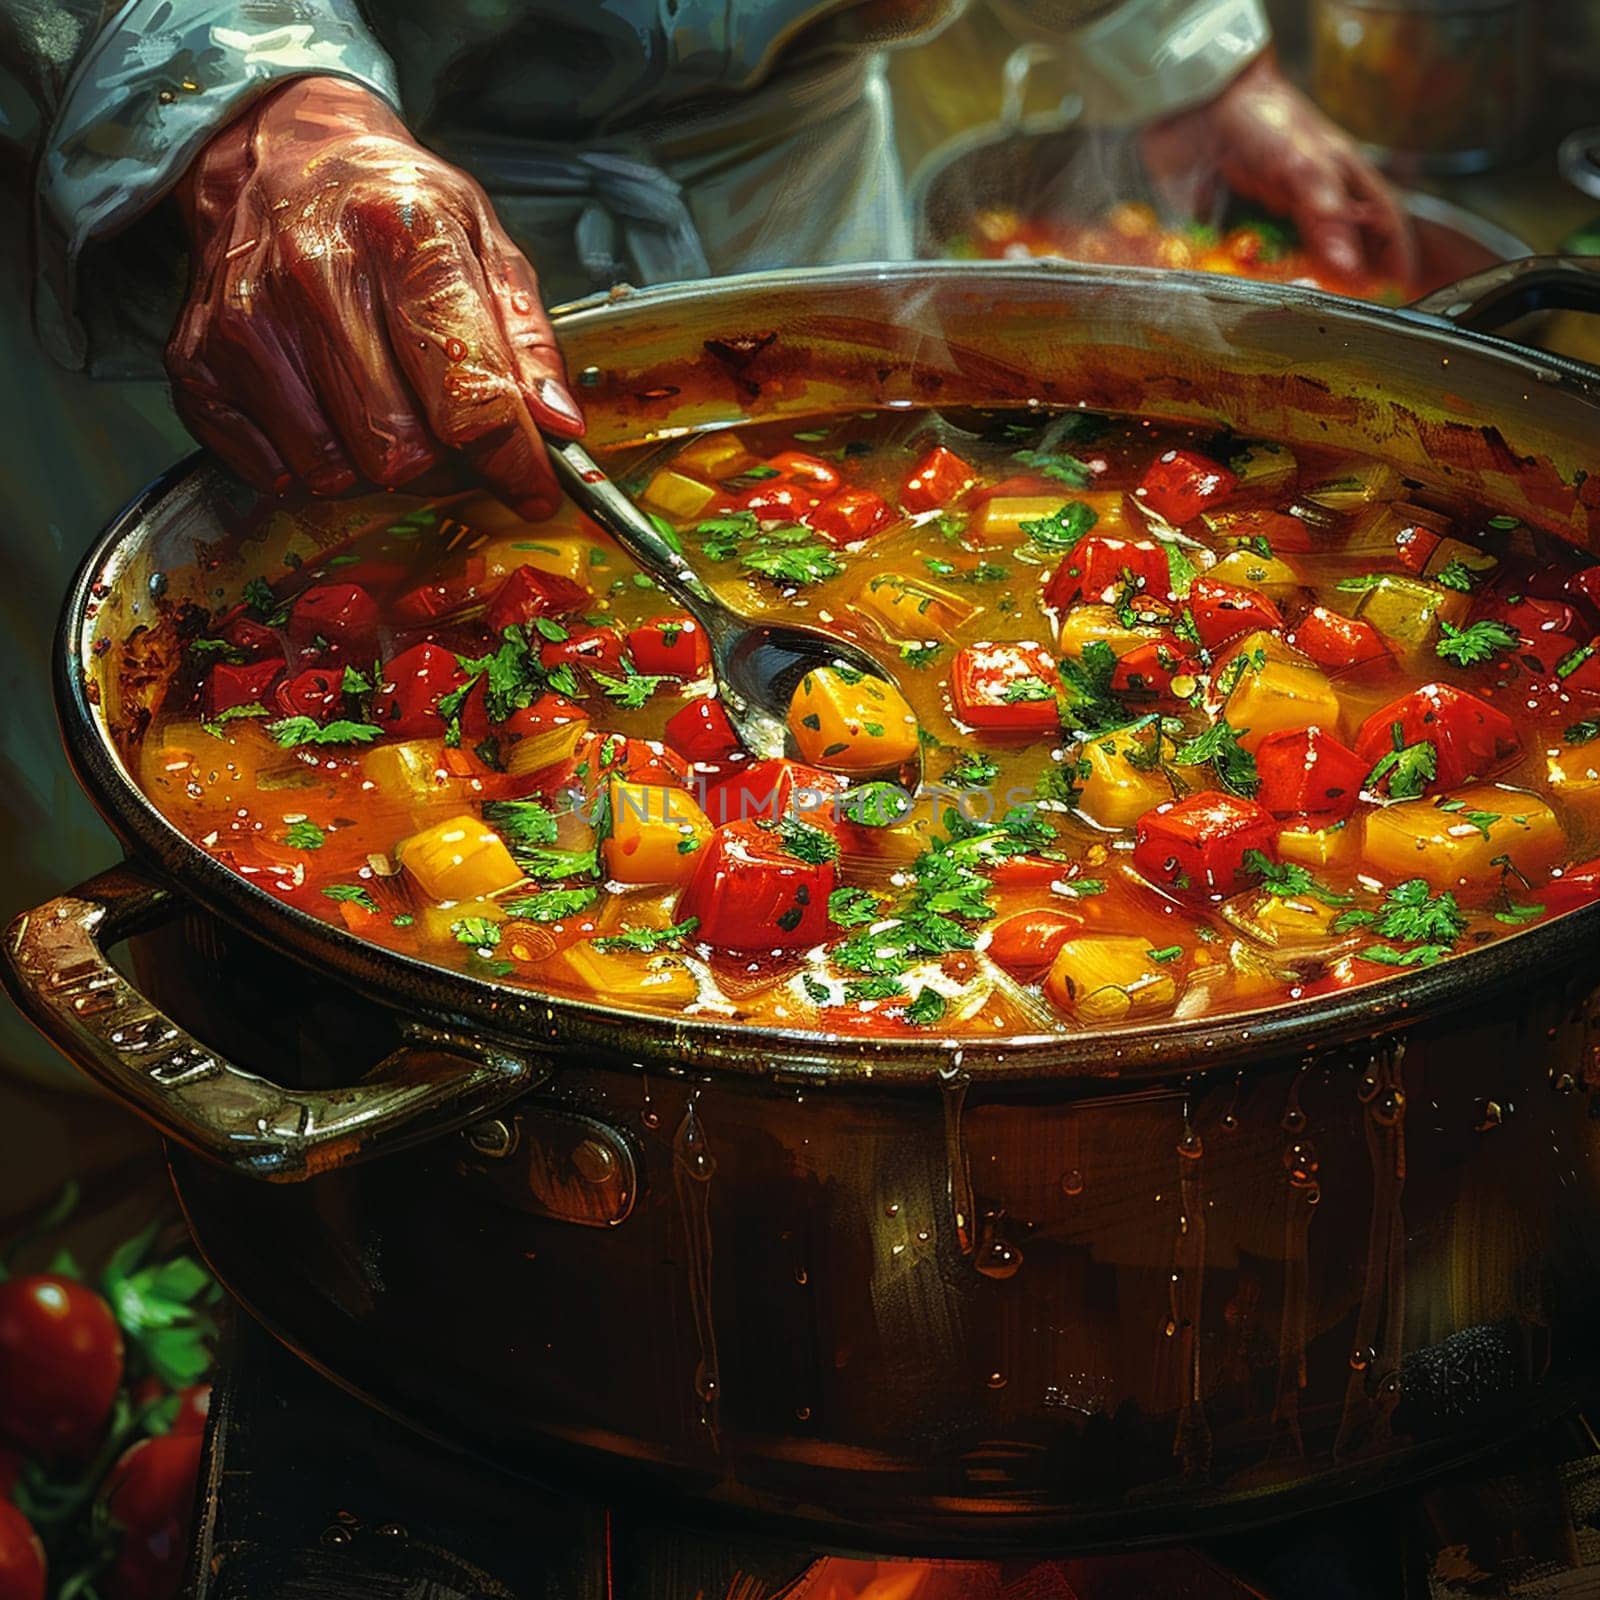 Hand stirring a pot of soup, evoking home cooking and family meals.